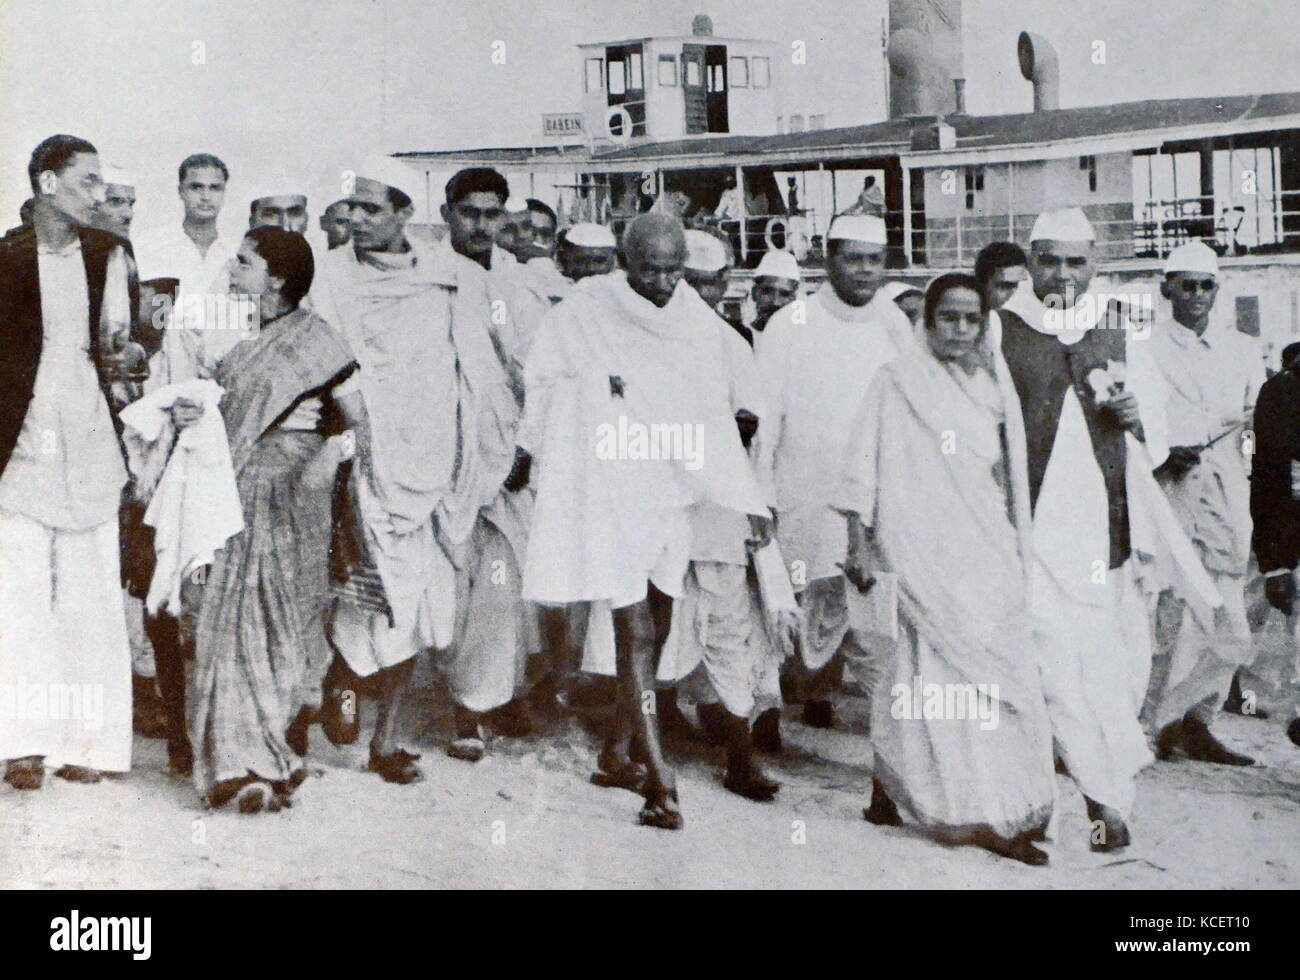 Mohandas Karamchand Gandhi visits Calcutta, 1946. Gandhi (2 October 1869 – 30 January 1948), was the preeminent leader of the Indian independence movement in British-ruled India. Stock Photo